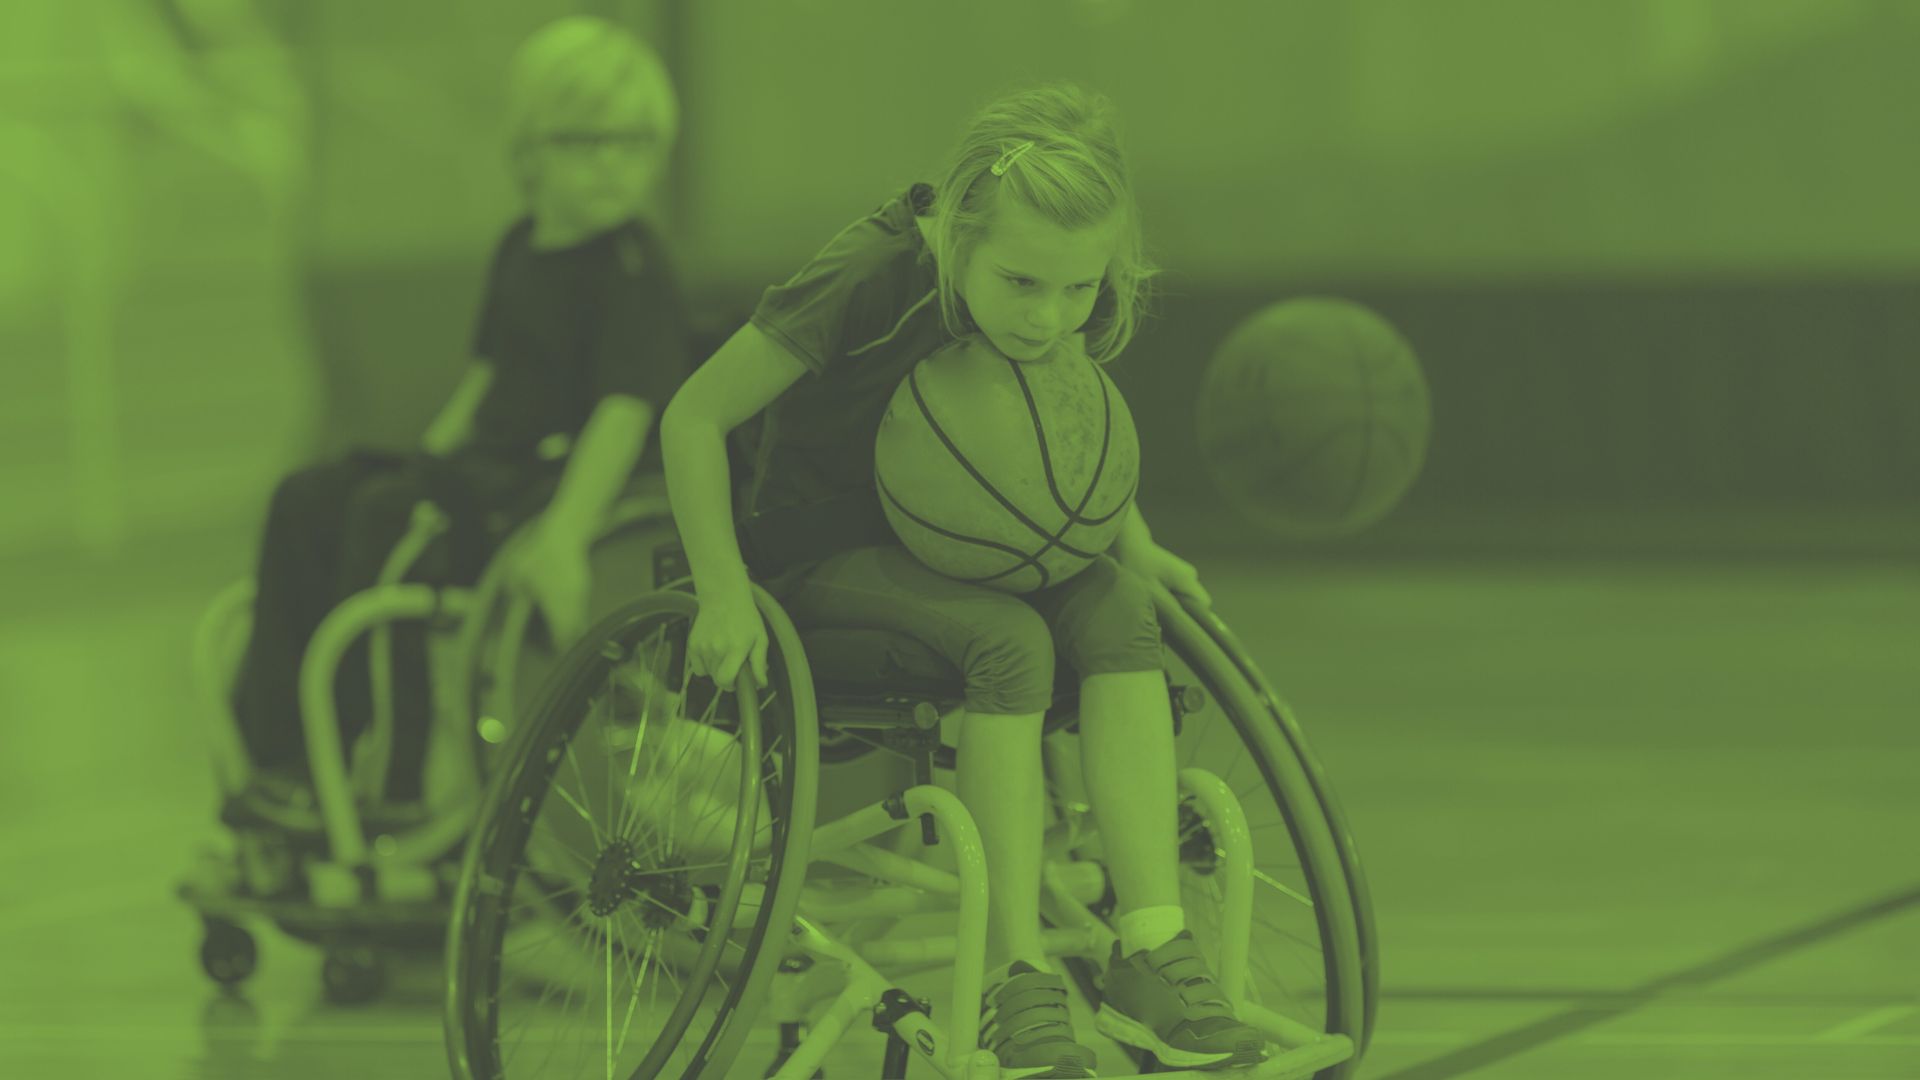 Photo of children using wheelchairs and playing basketball - Opportunities for young people at Oval Learning schools to get funding to support them in education and sports